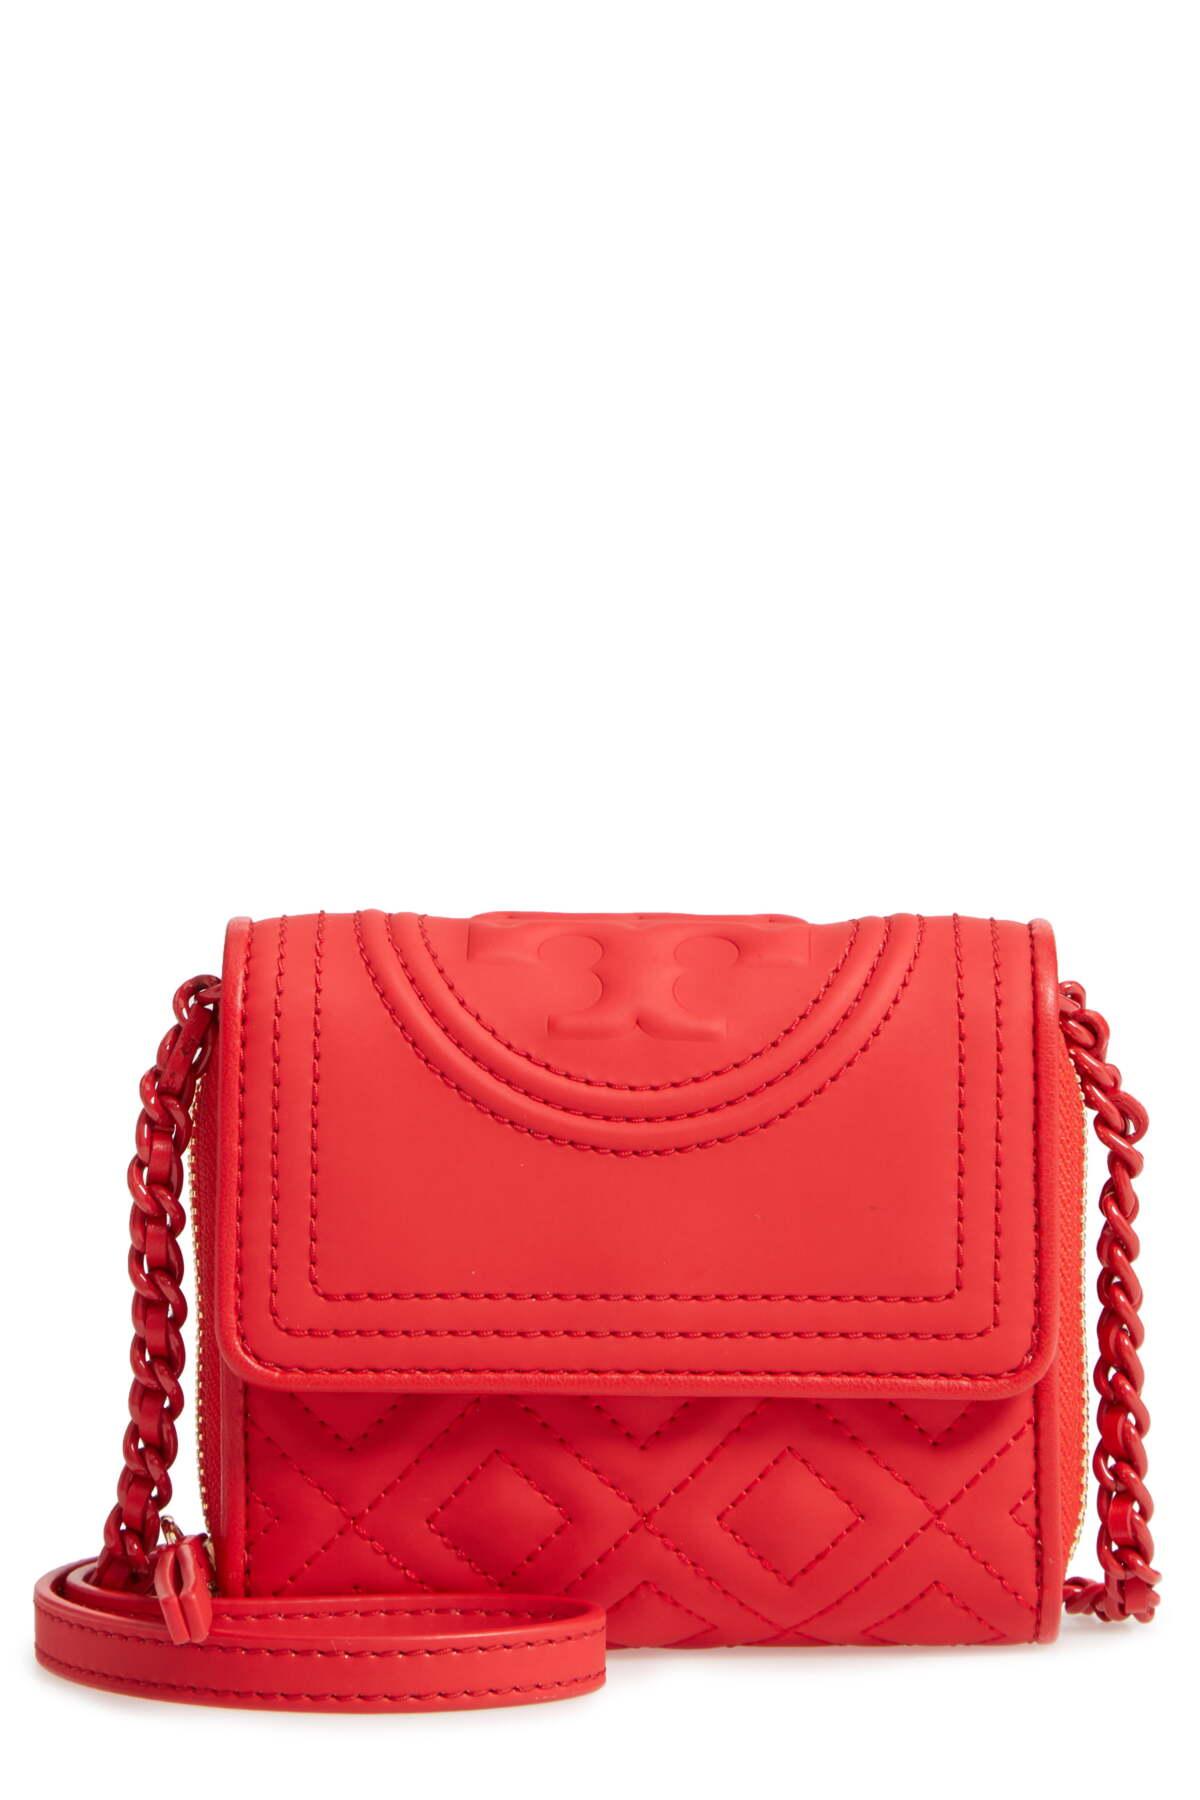 Tory Burch Mini Fleming Matte Wallet On A Chain in Red - Lyst